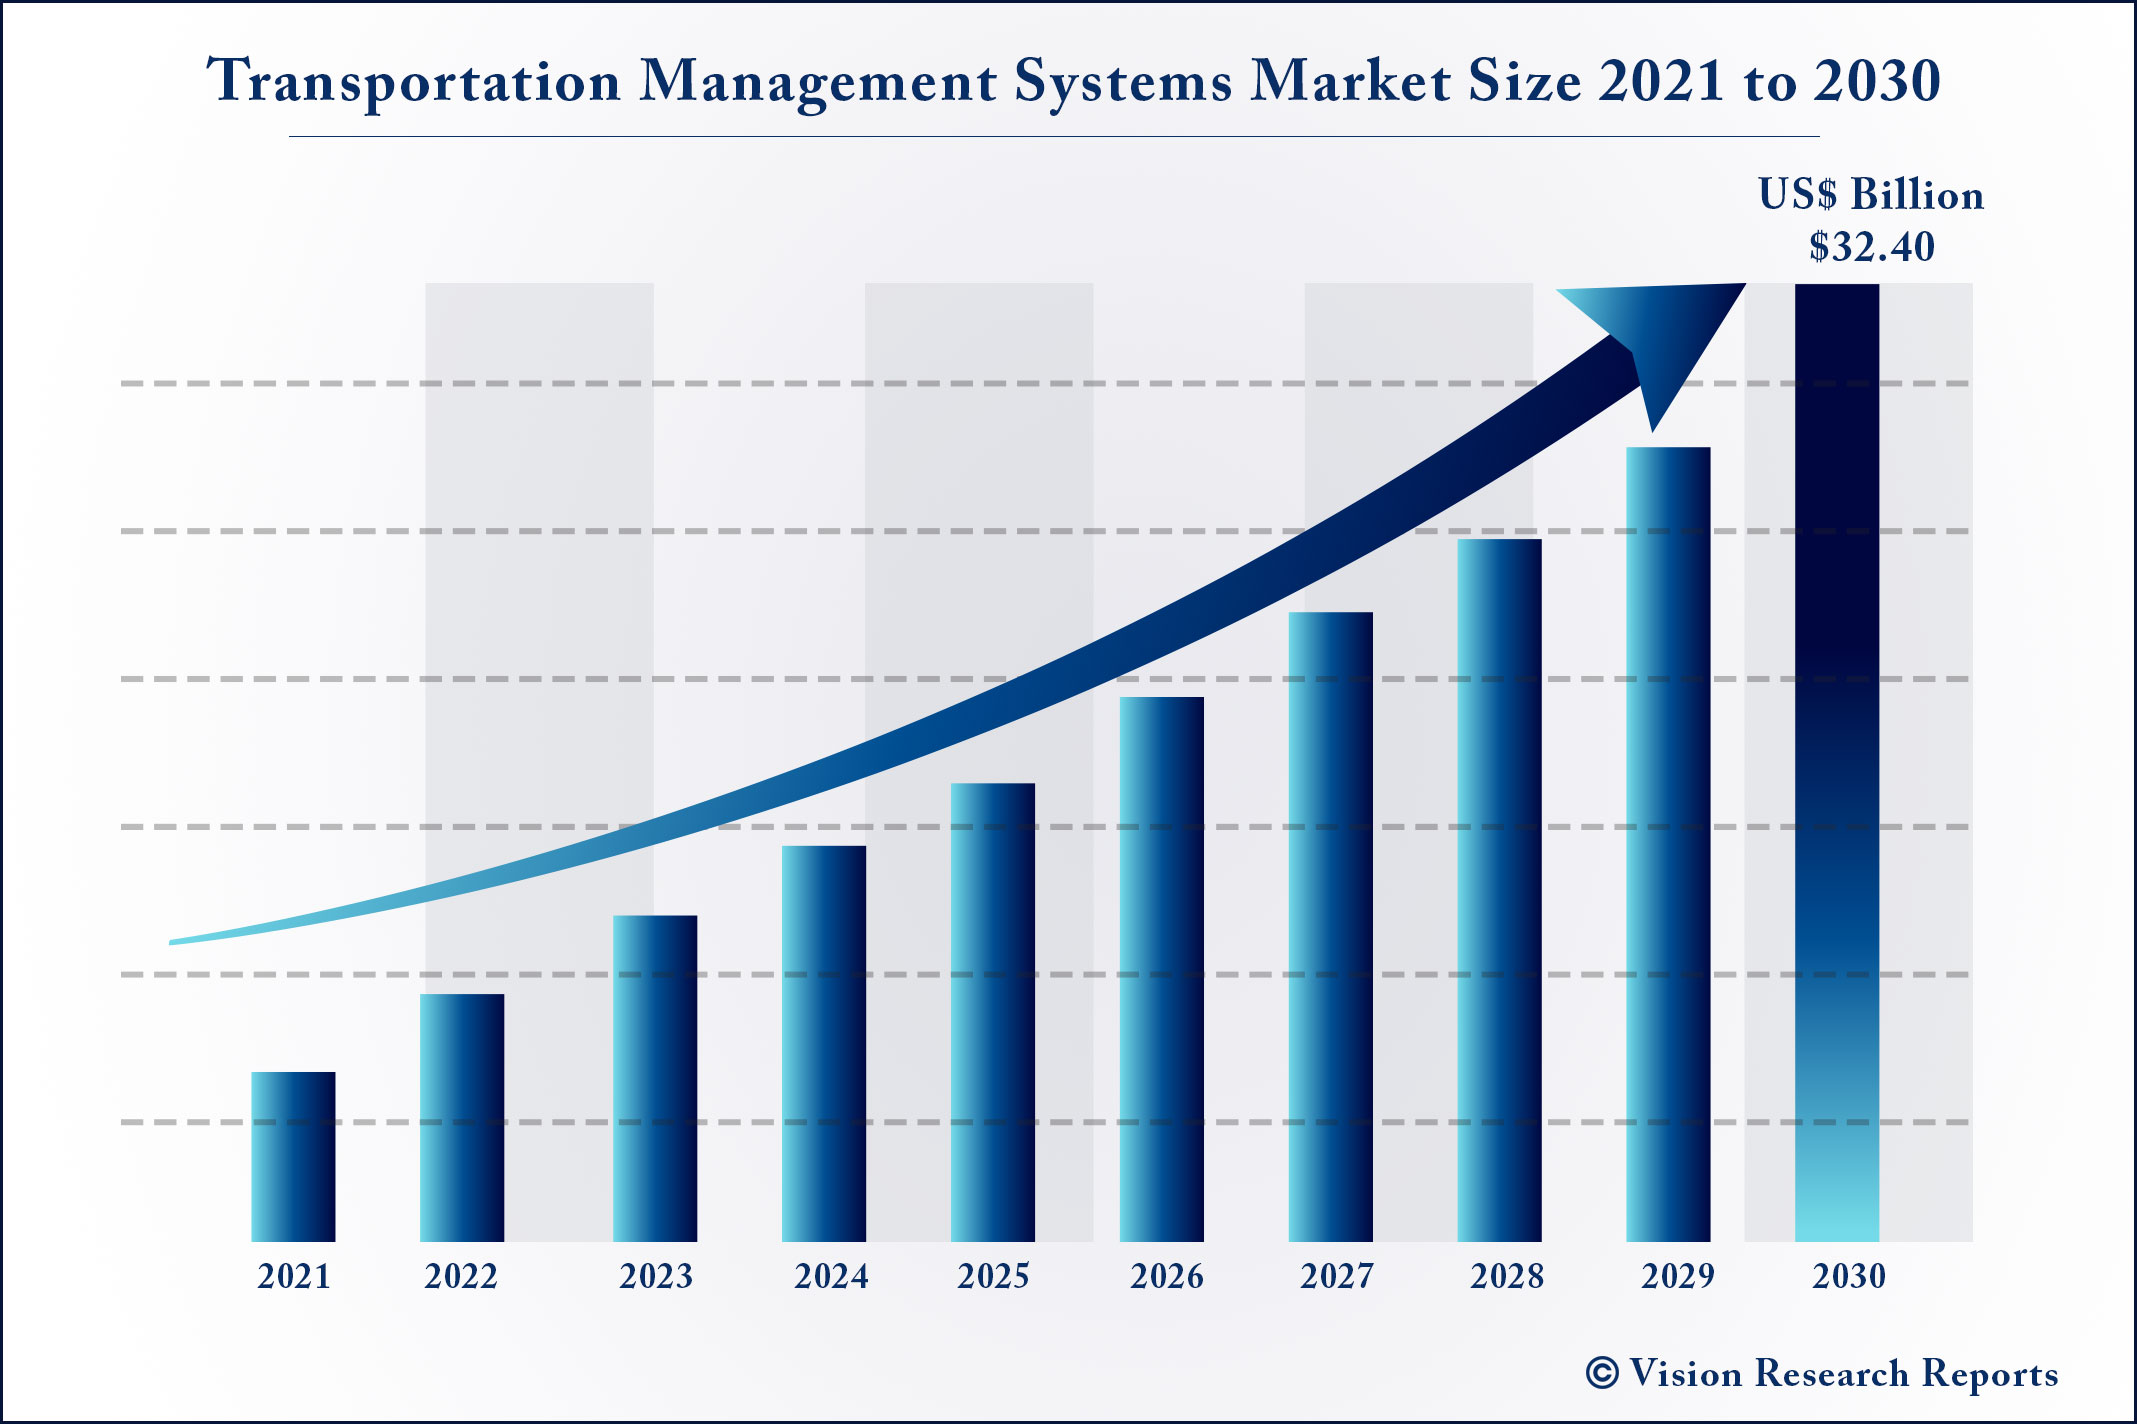 Transportation Management Systems Market Size 2021 to 2030